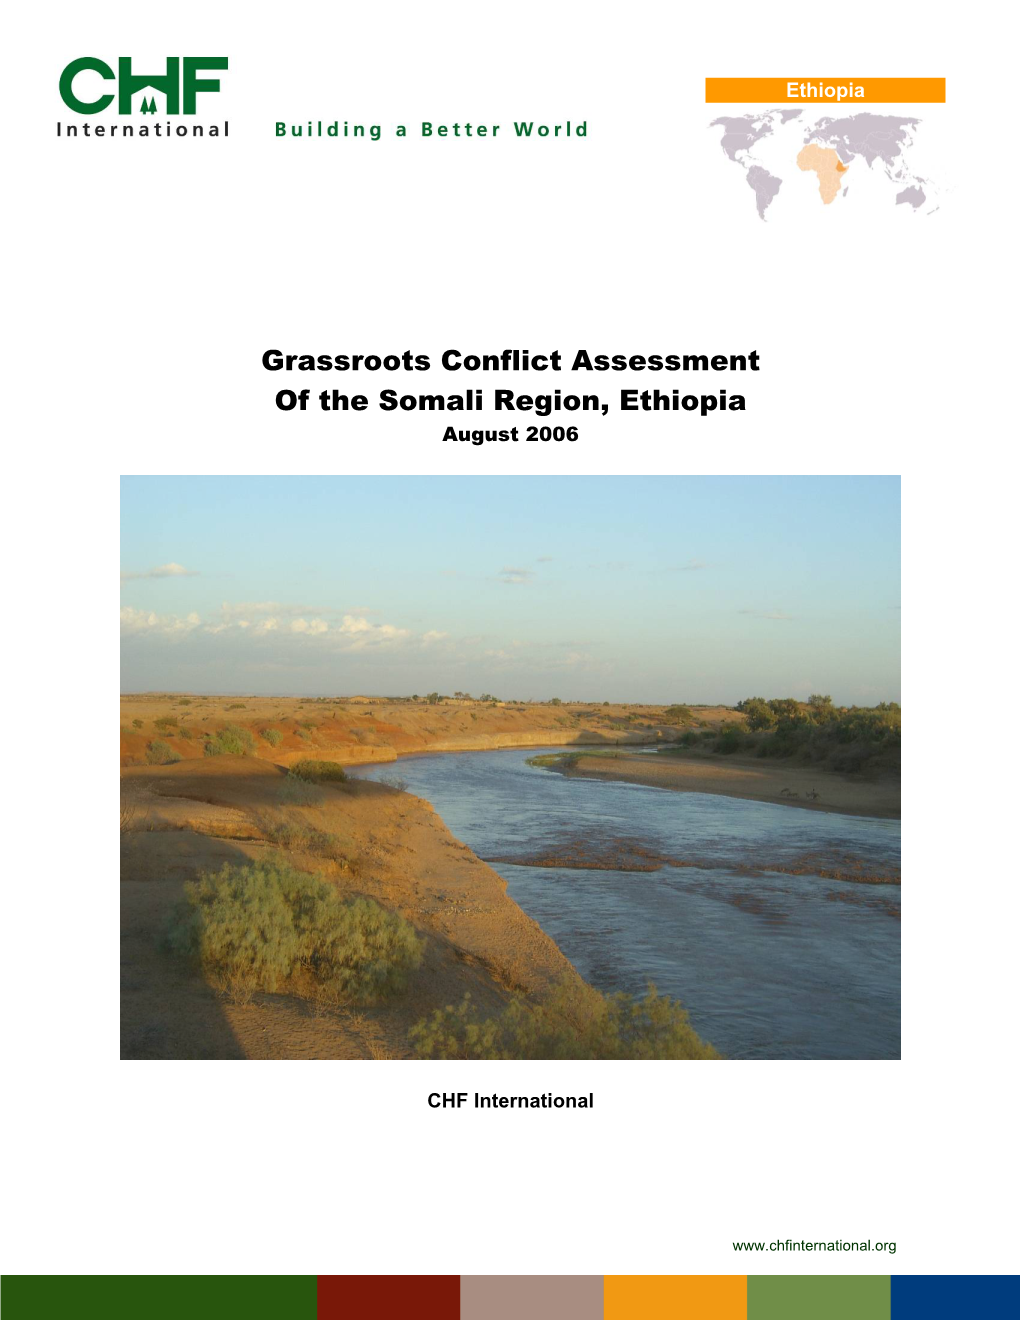 Grassroots Conflict Assessment of the Somali Region, Ethiopia August 2006